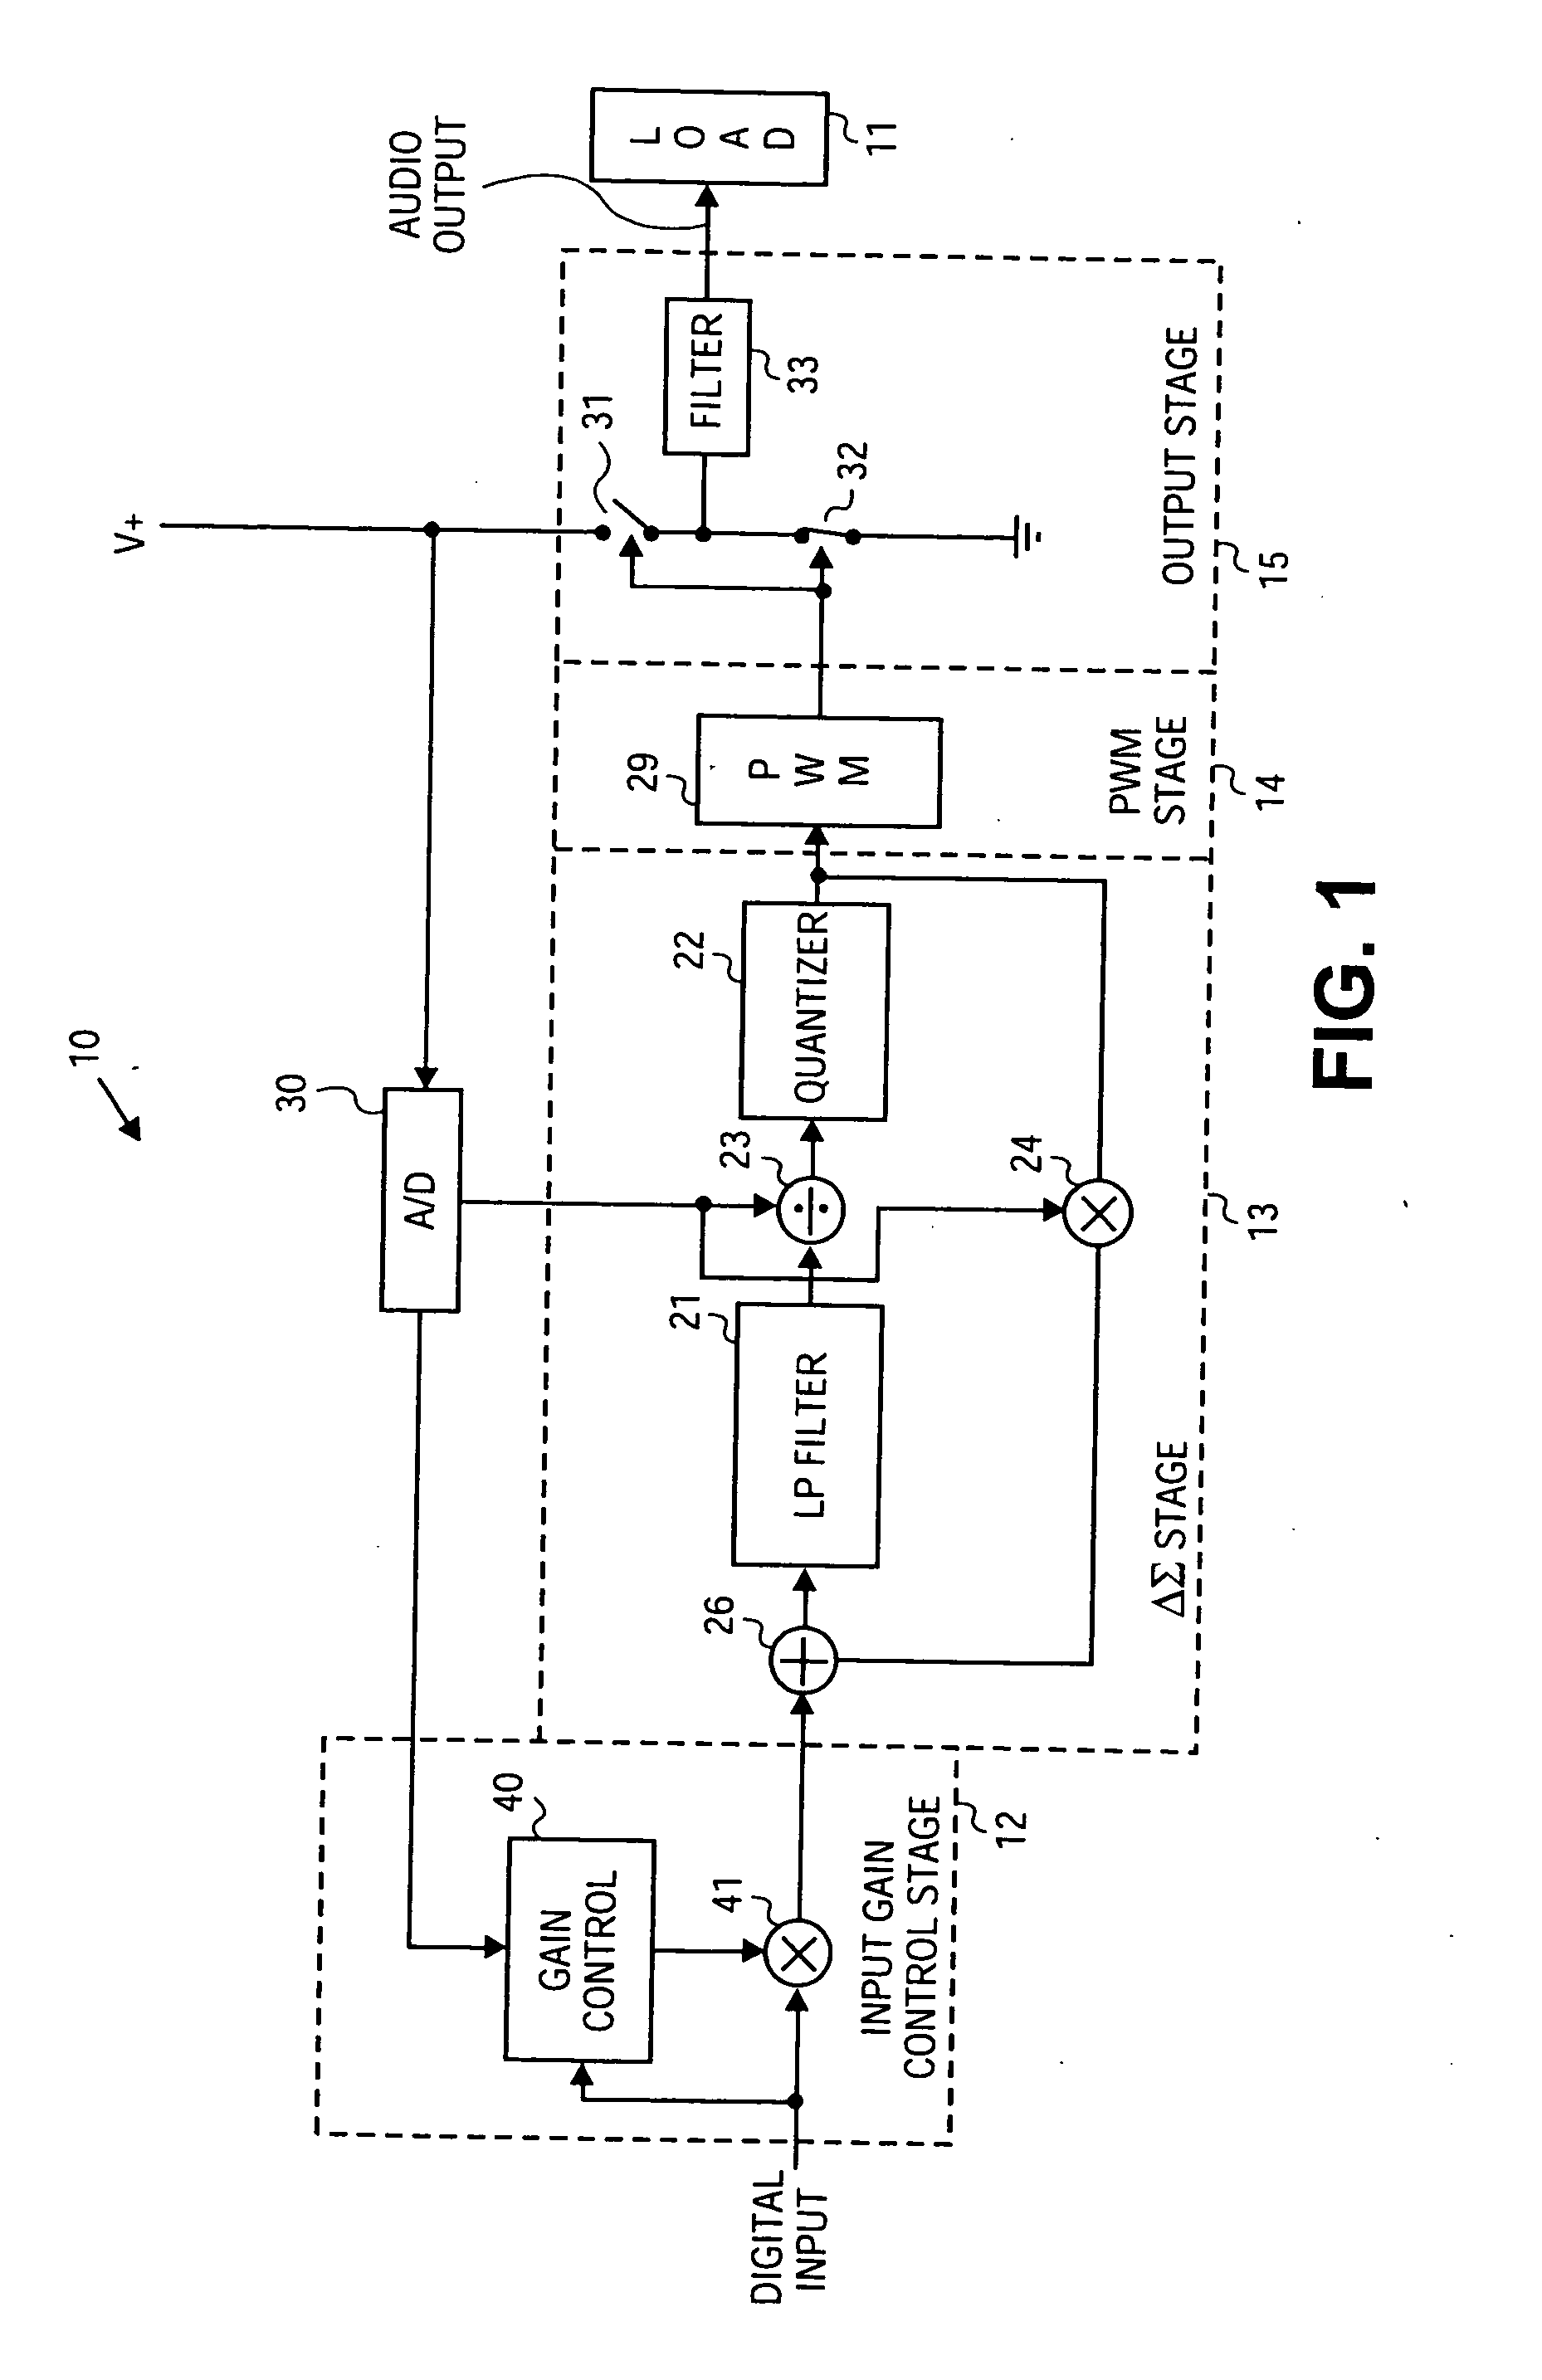 Power supply based audio compression for digital audio amplifier